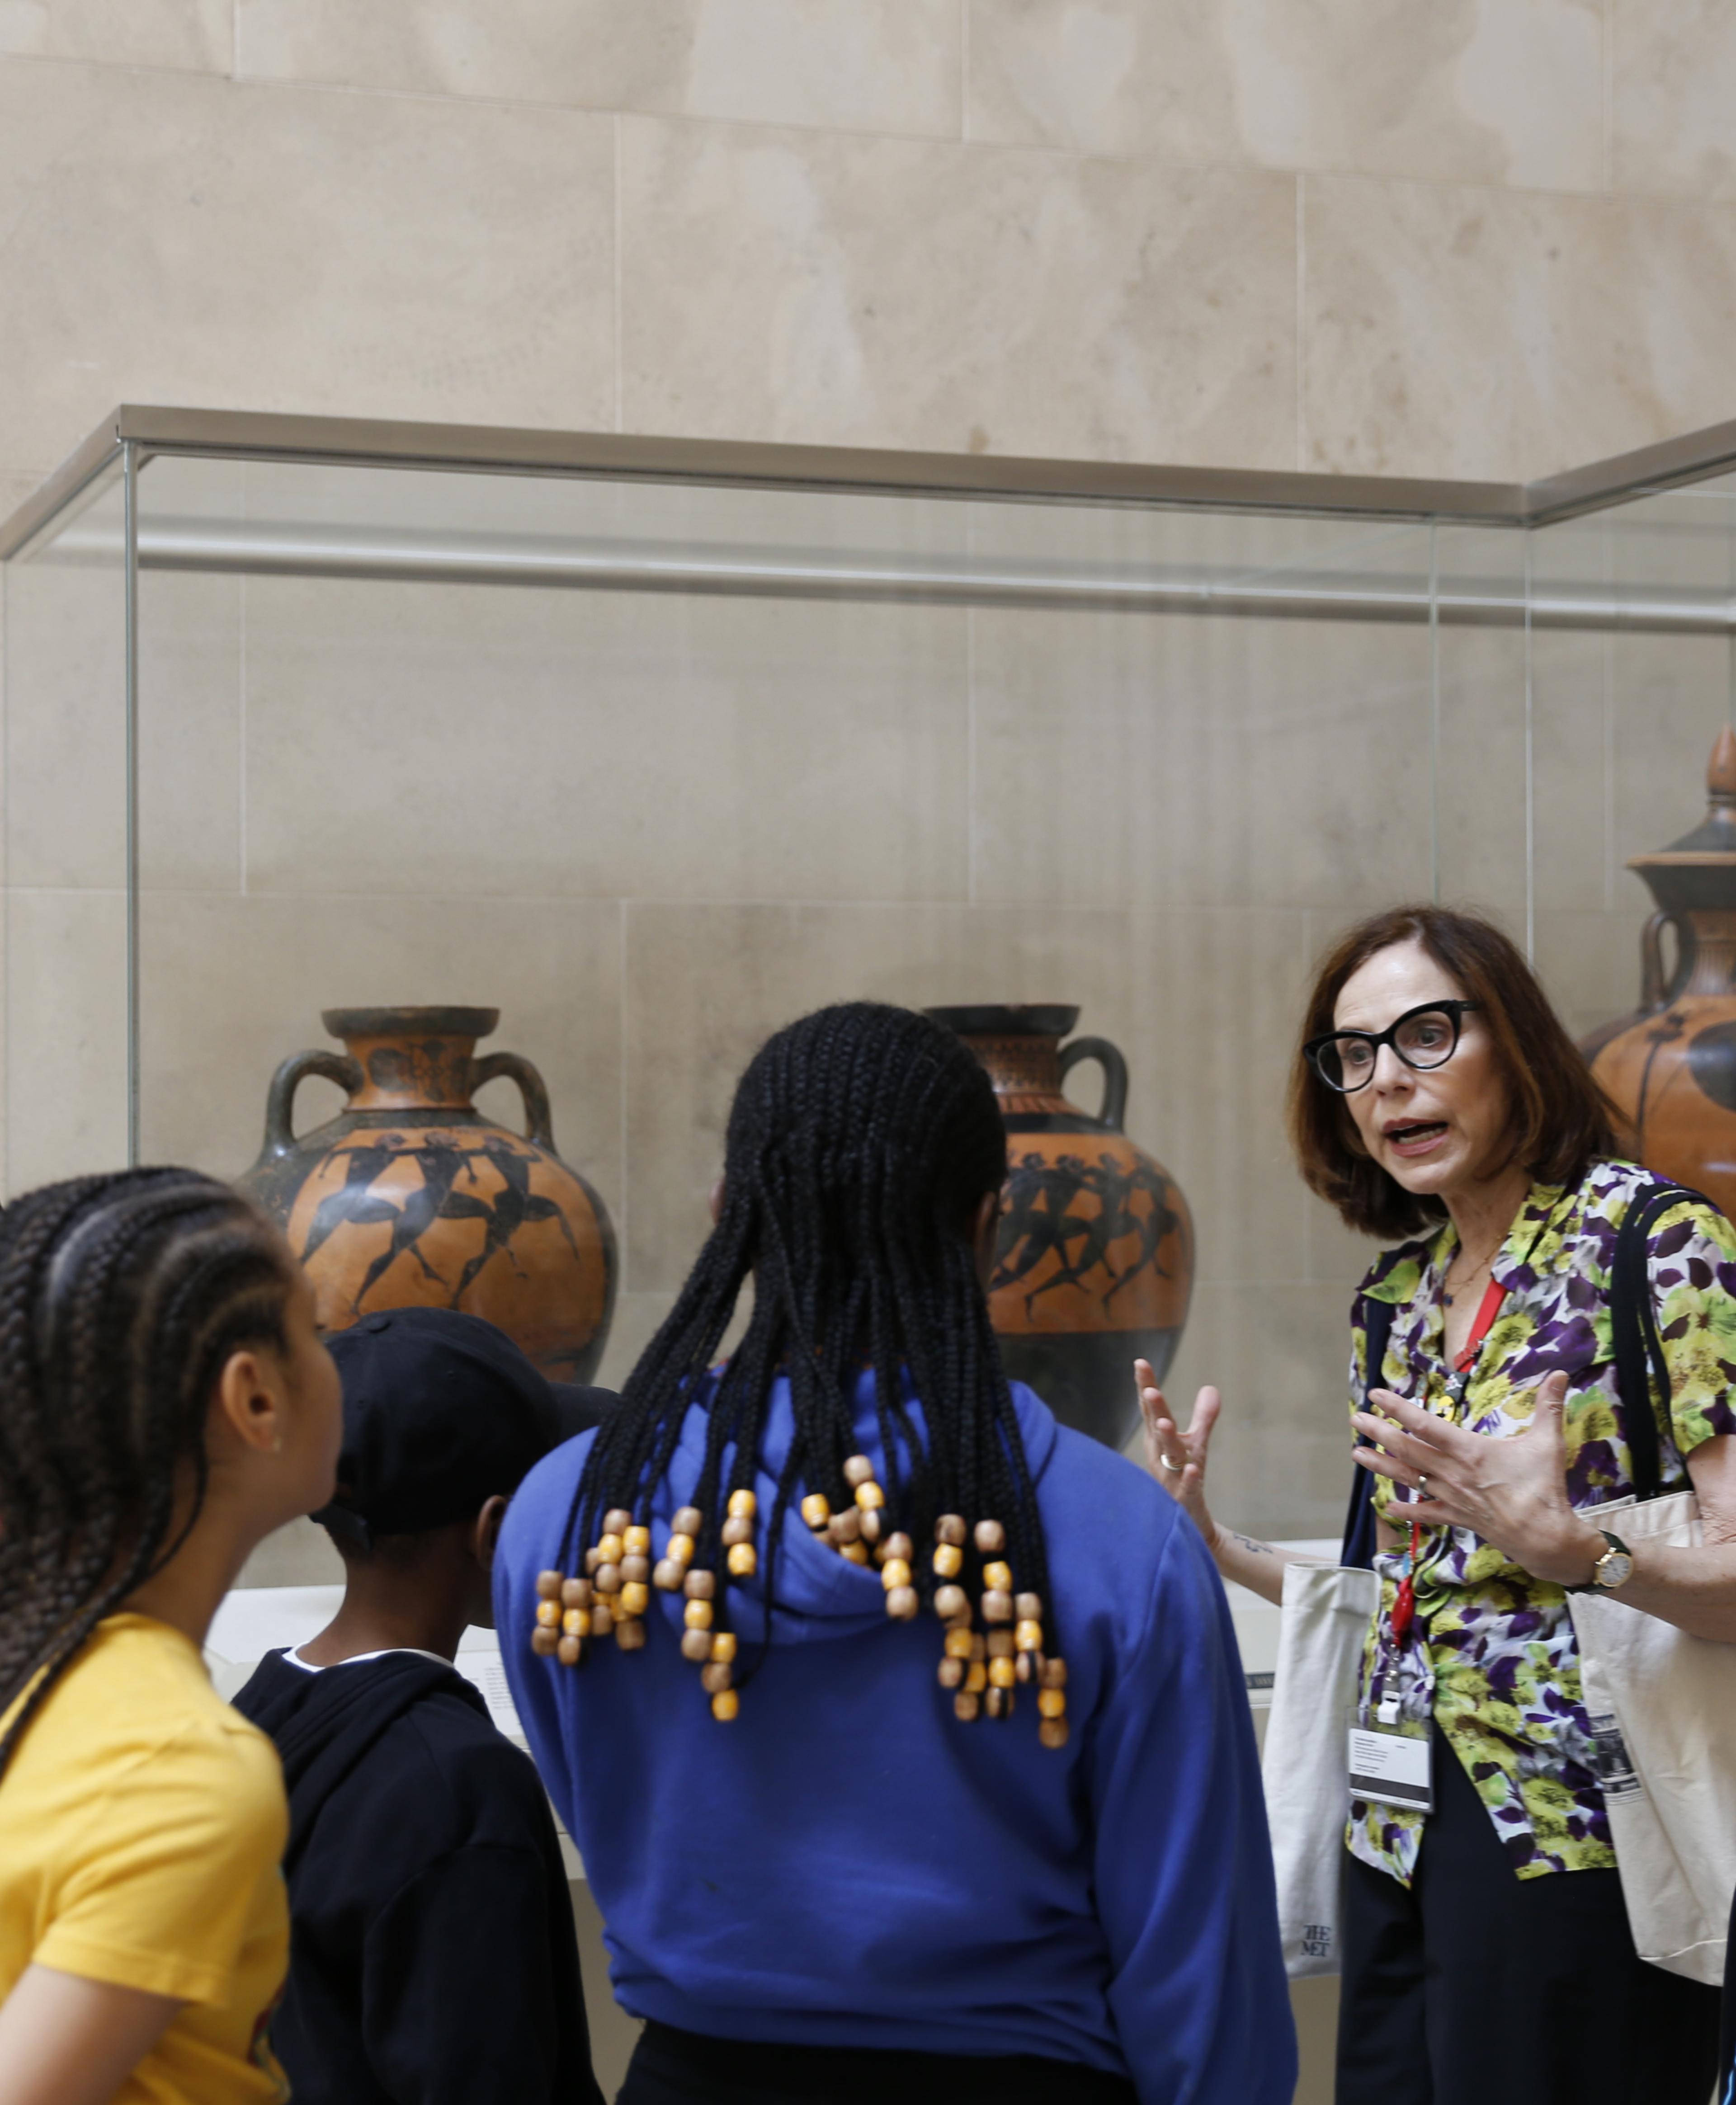 A tour group leader speaks to a group of young people in The Met's Greek and Roman Galleries.